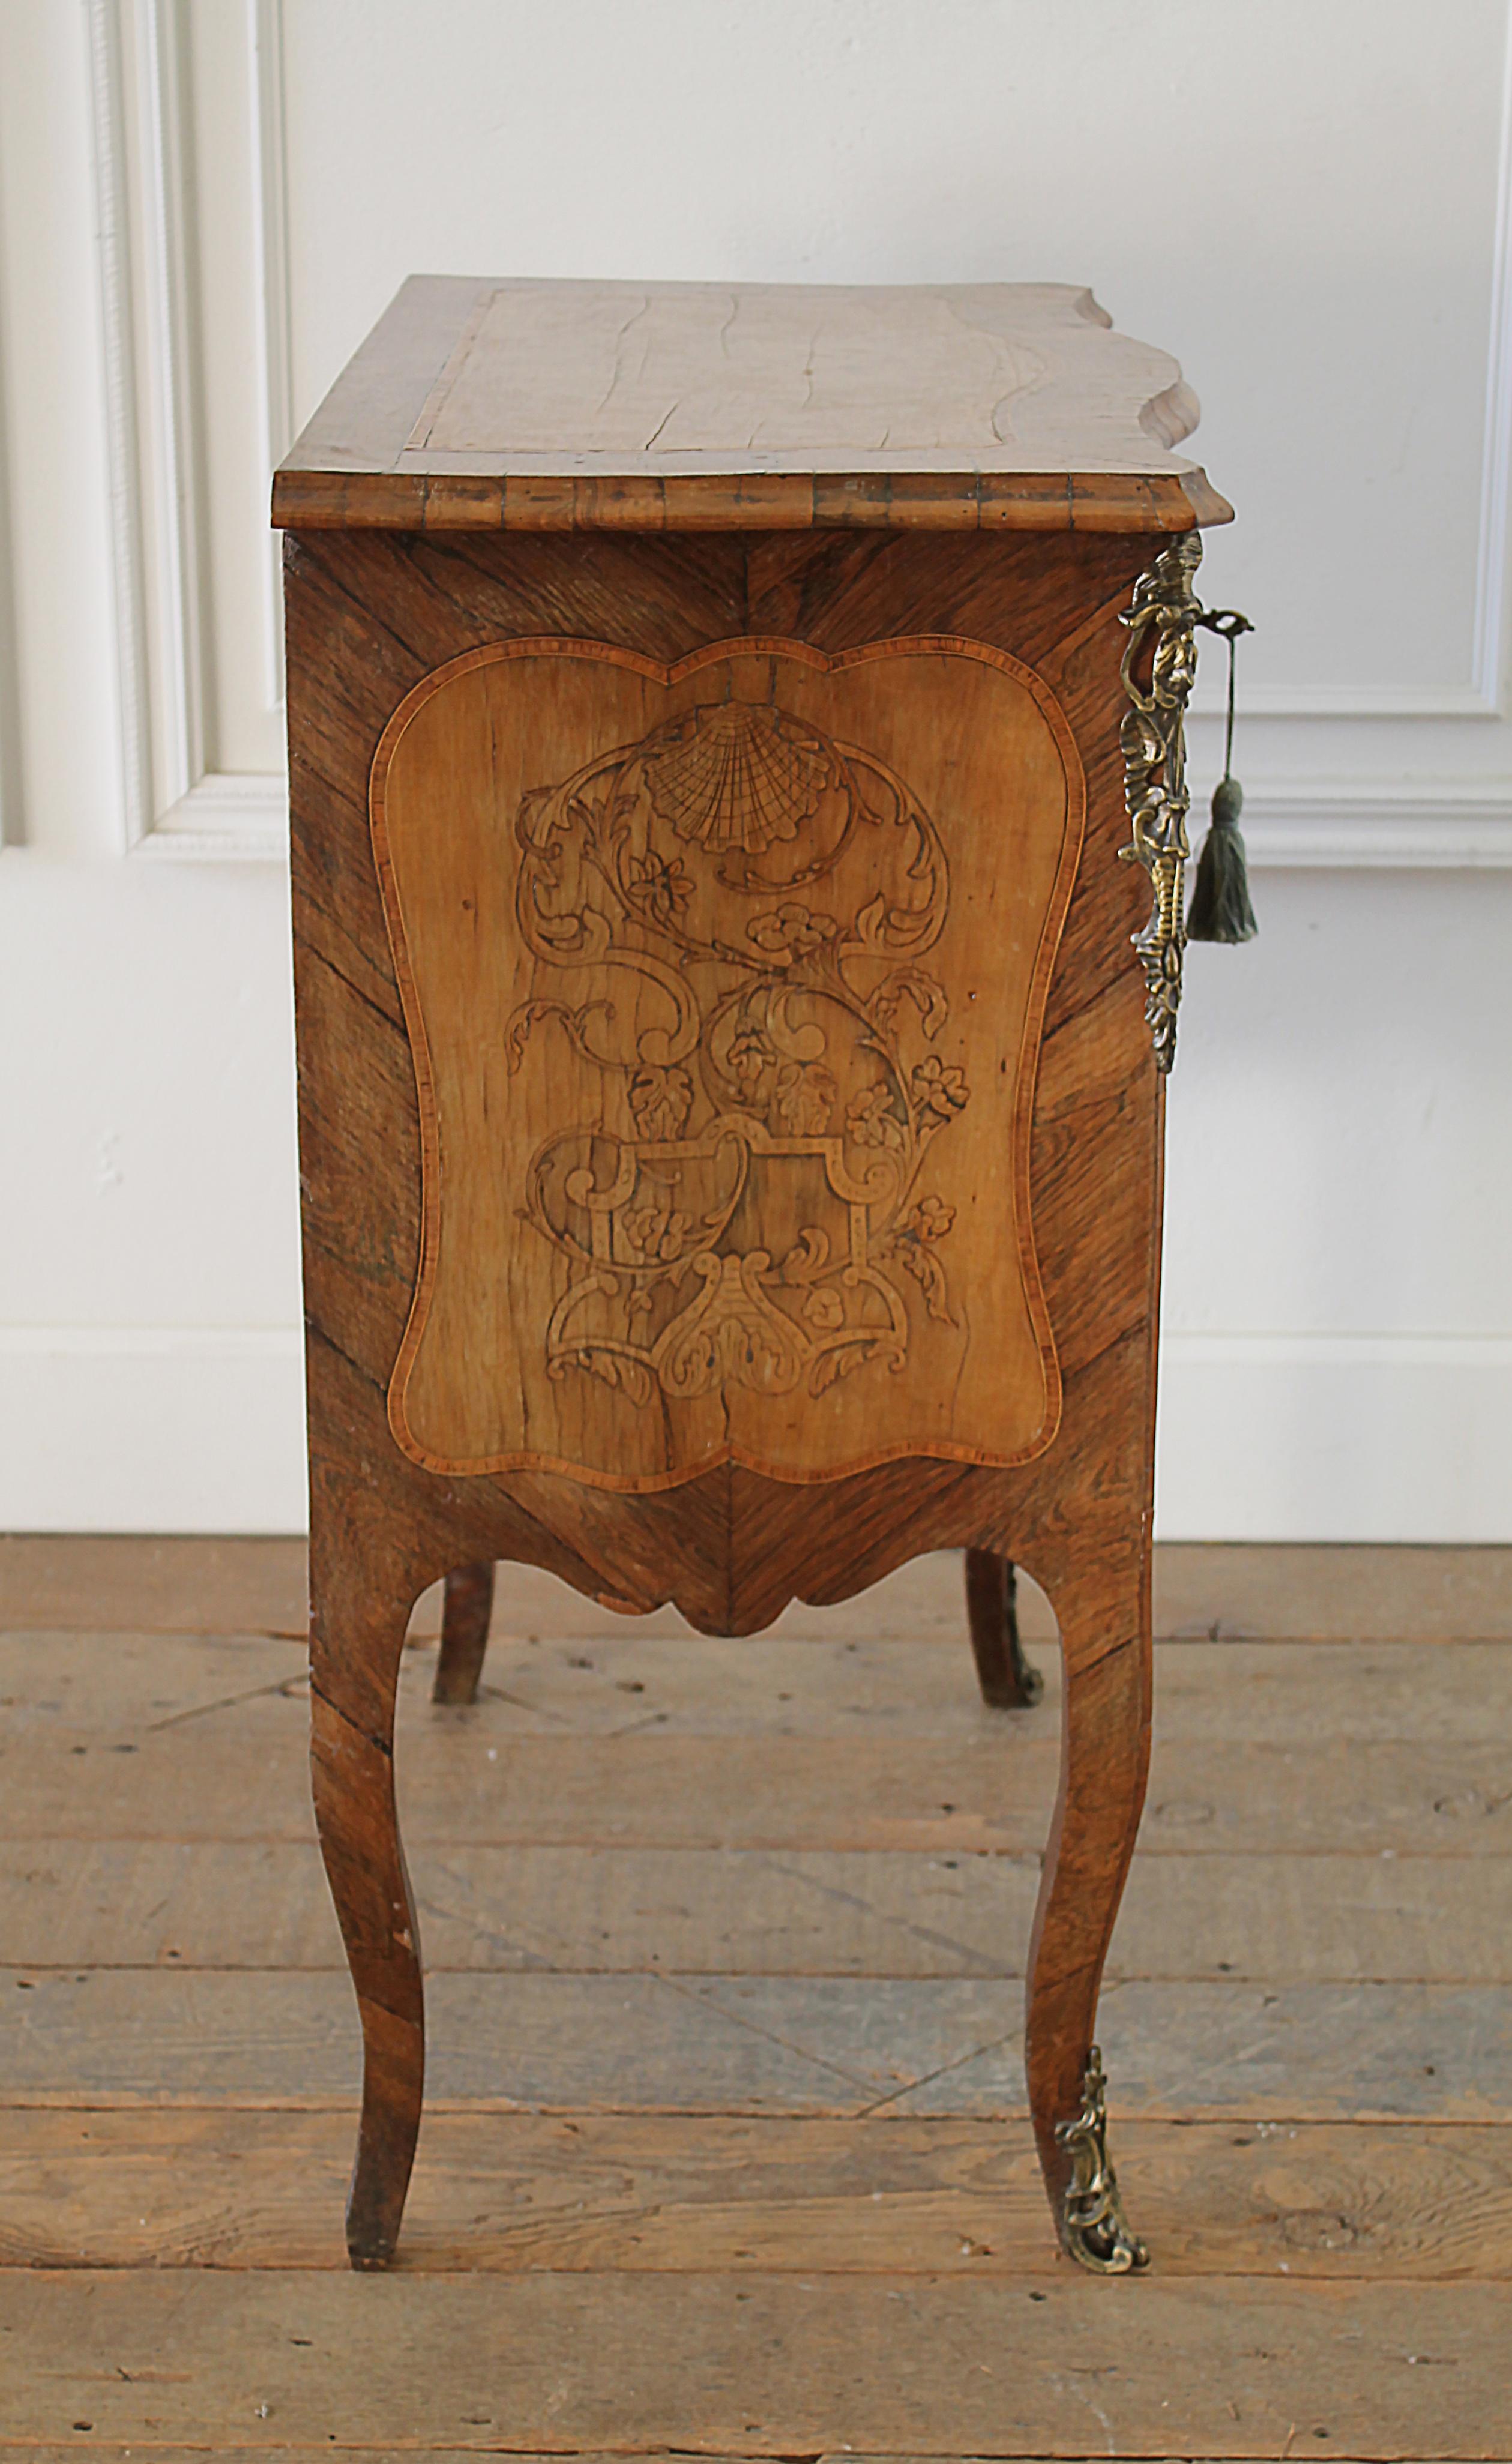 20th Century Louis XV Style Inlay Commode with Bronze Mounts (Intarsie)